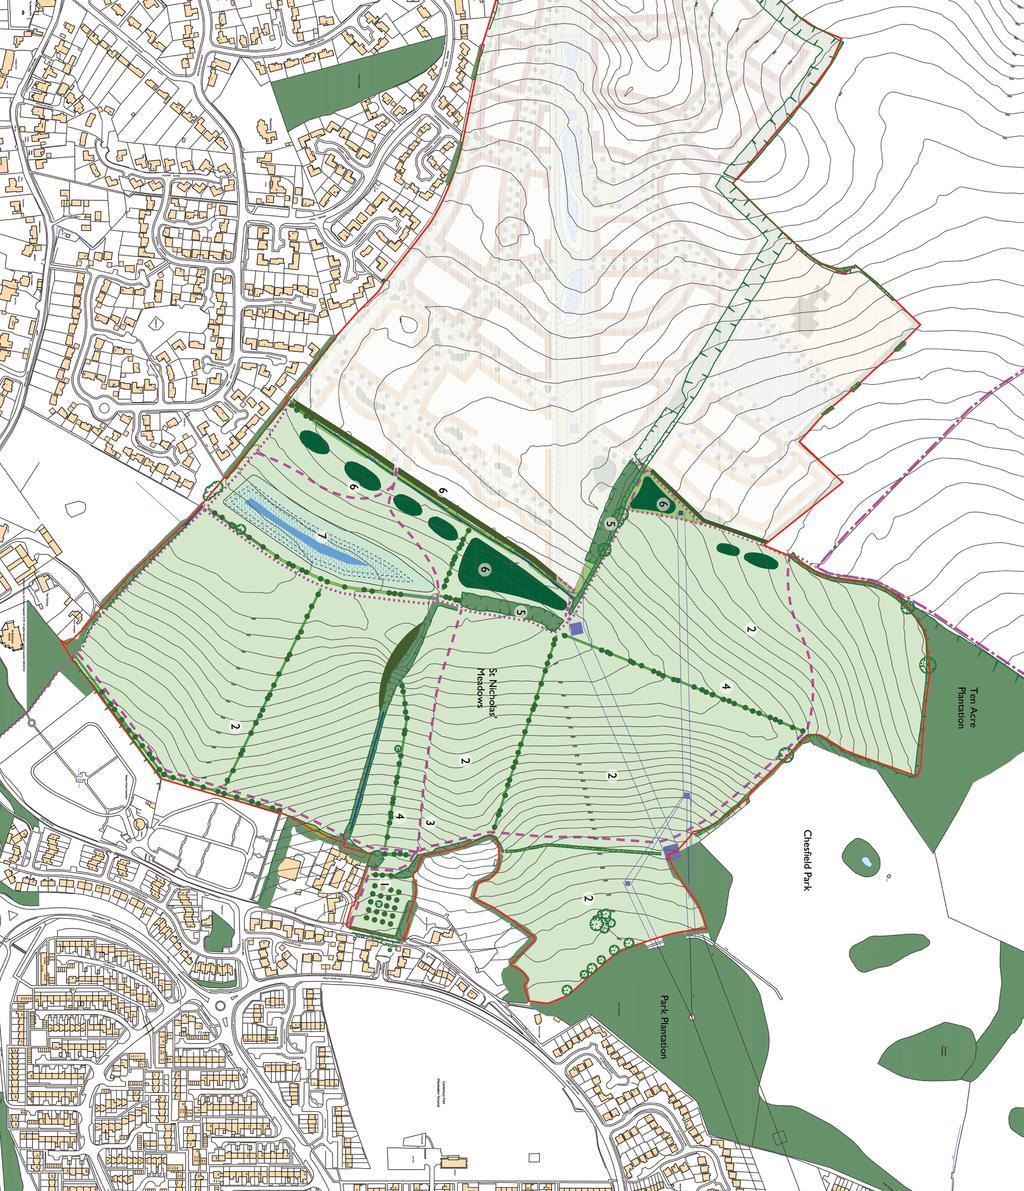 Land North of ST NICHOLAS MEADOWS Landscape plan Site application boundary Existing arable field to be managed as hay meadow Proposed indicative tree planting Proposed SuDs ponds/ attenuation basins